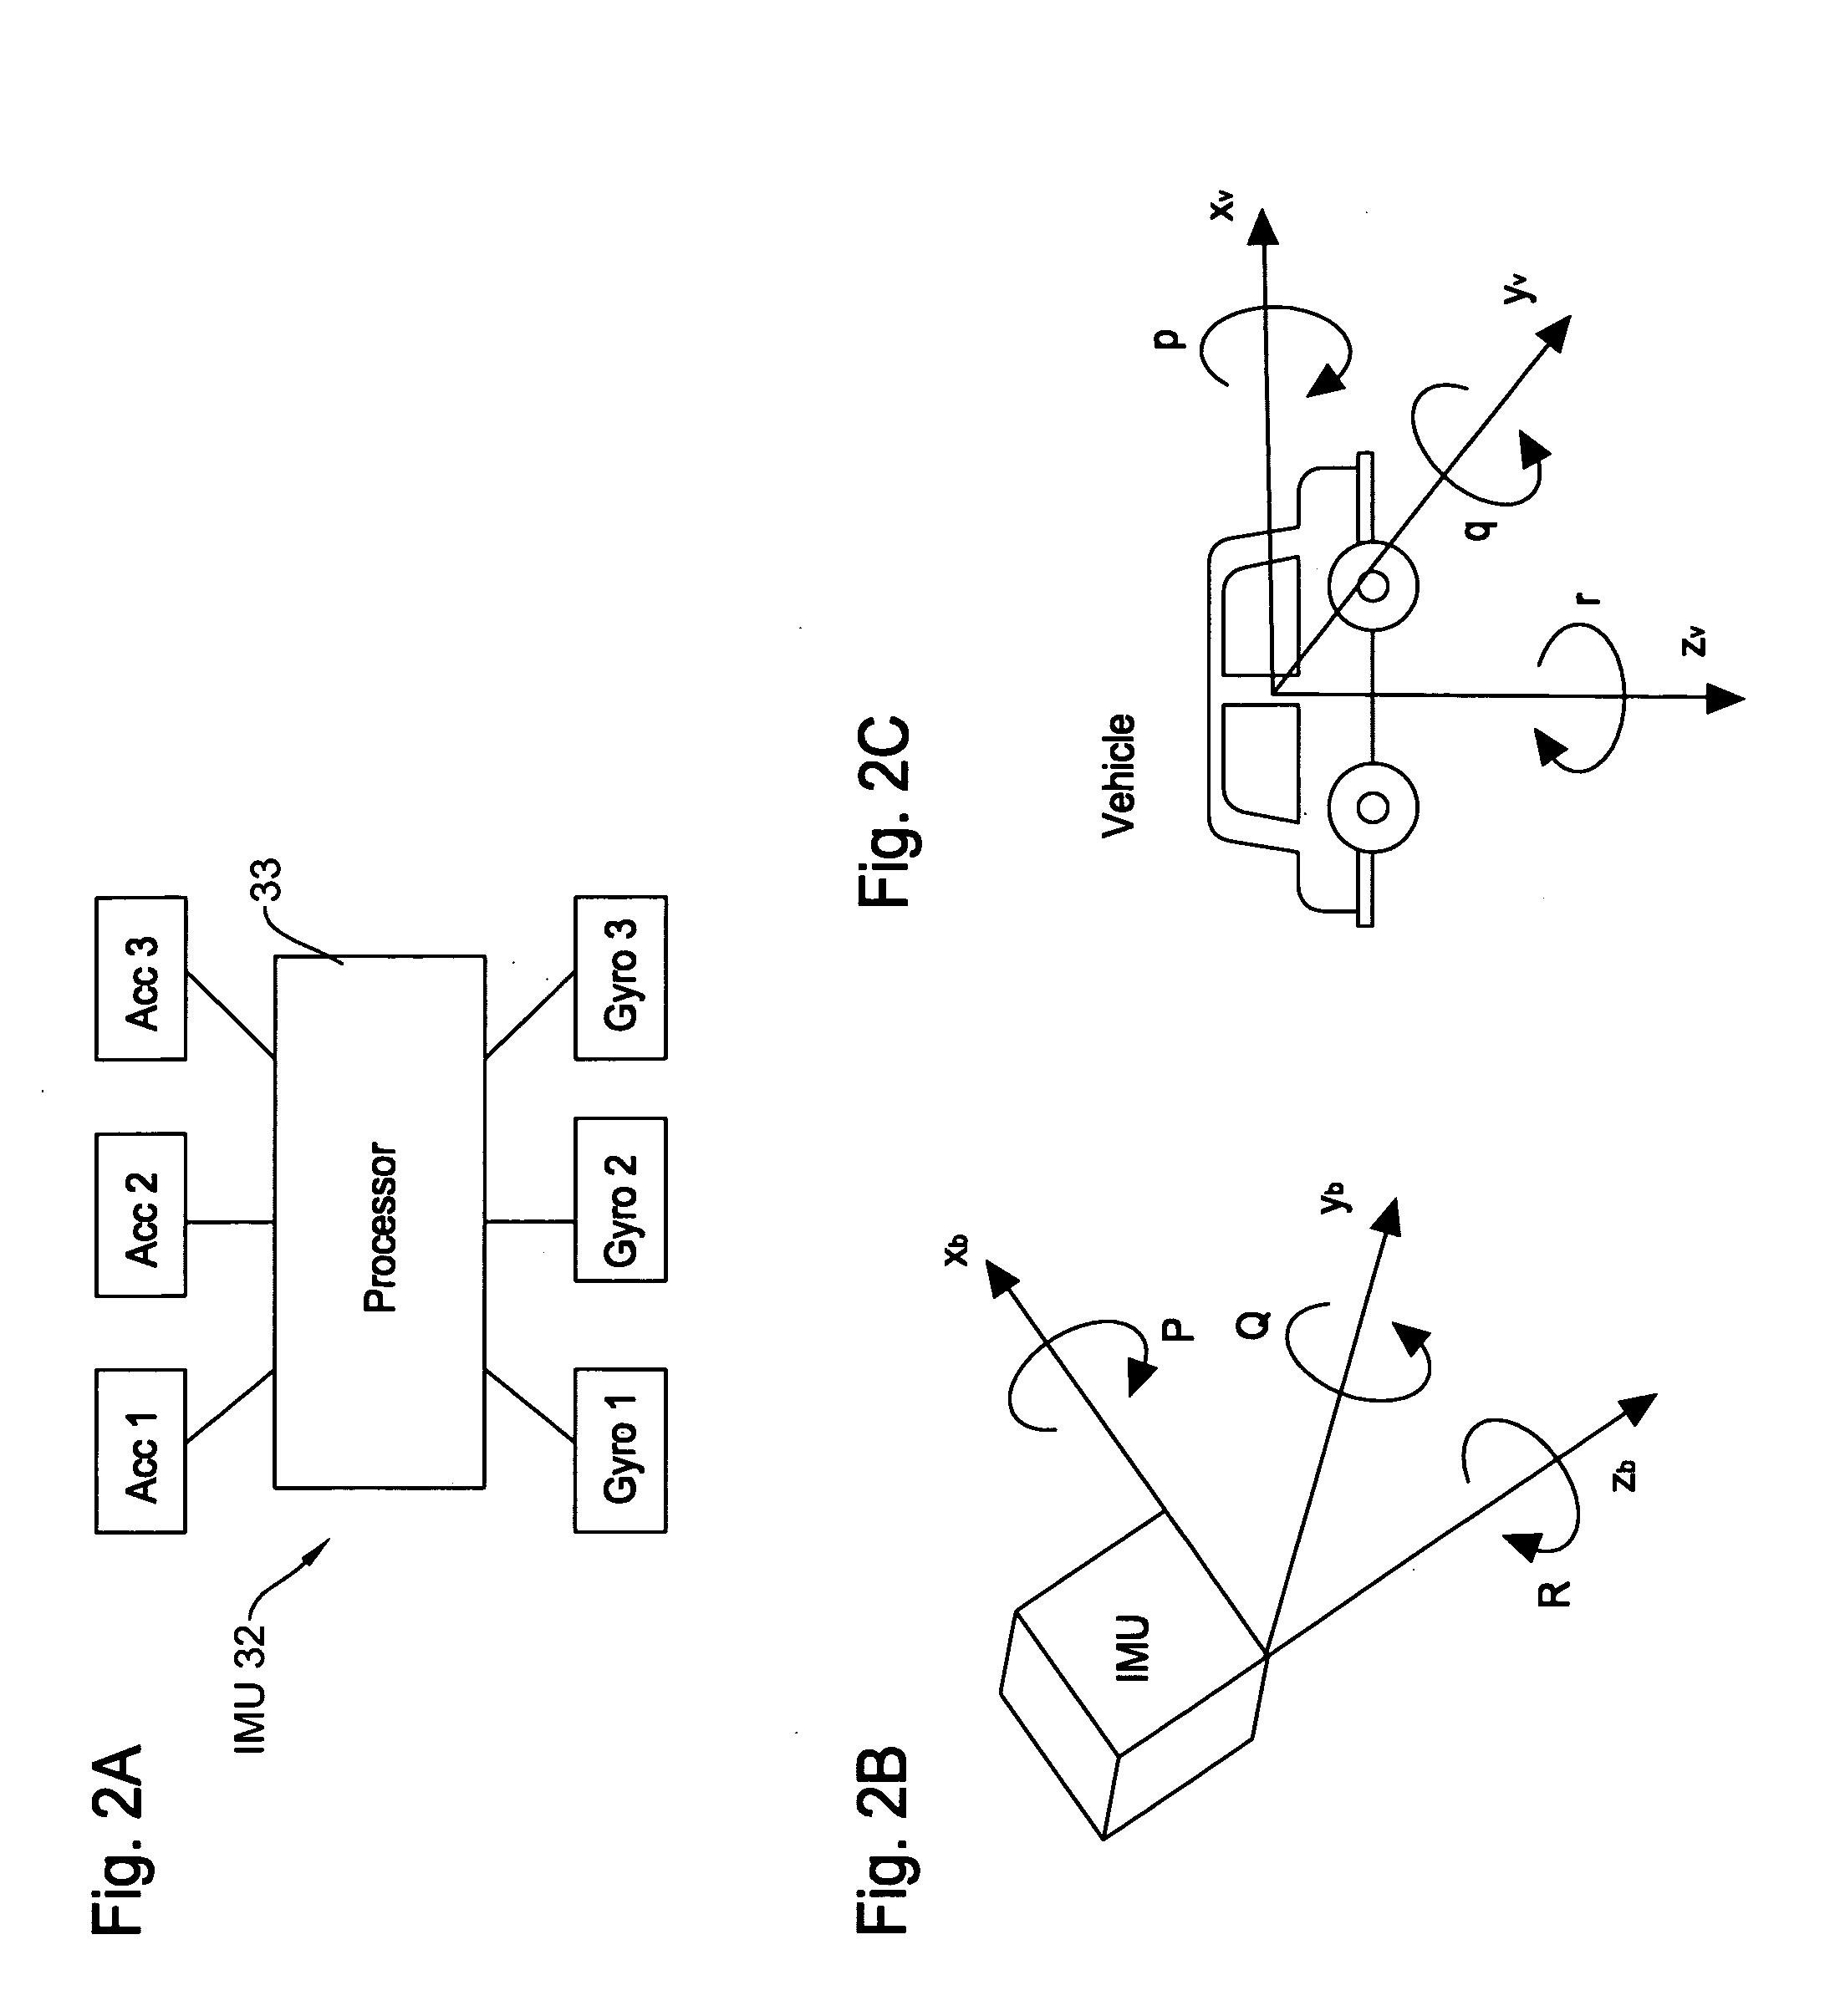 Vehicle dynamics conditioning method on MEMS based integrated INS/GPS vehicle navigation system